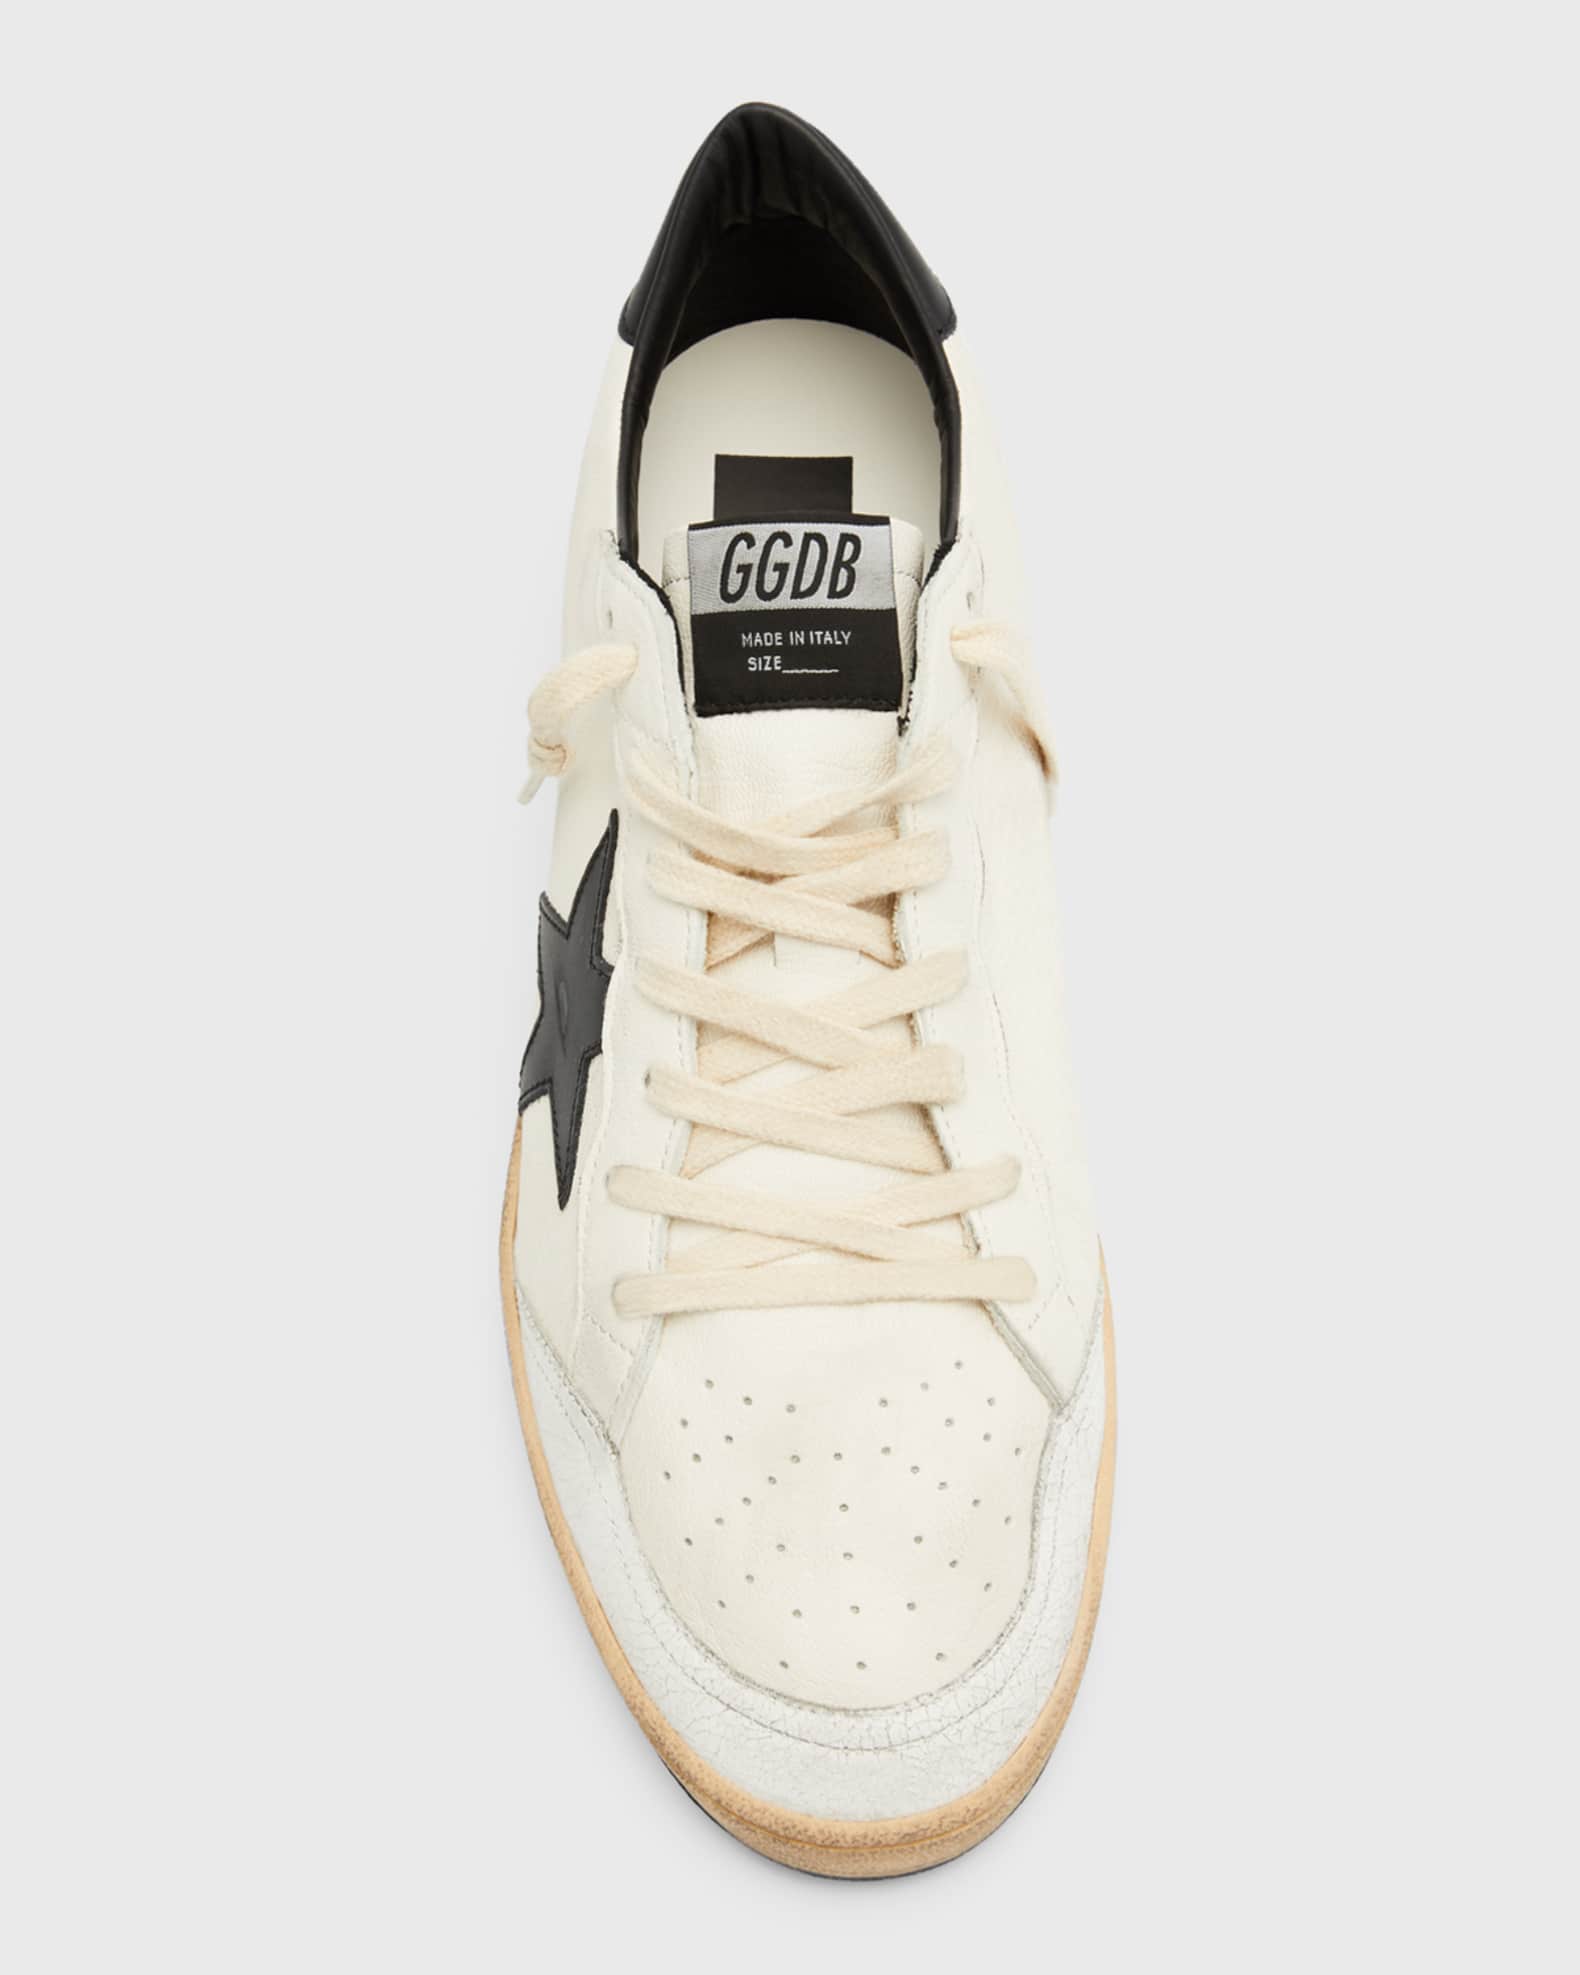 Golden Goose Men's Ball Star Distressed Leather Low-Top Sneakers ...